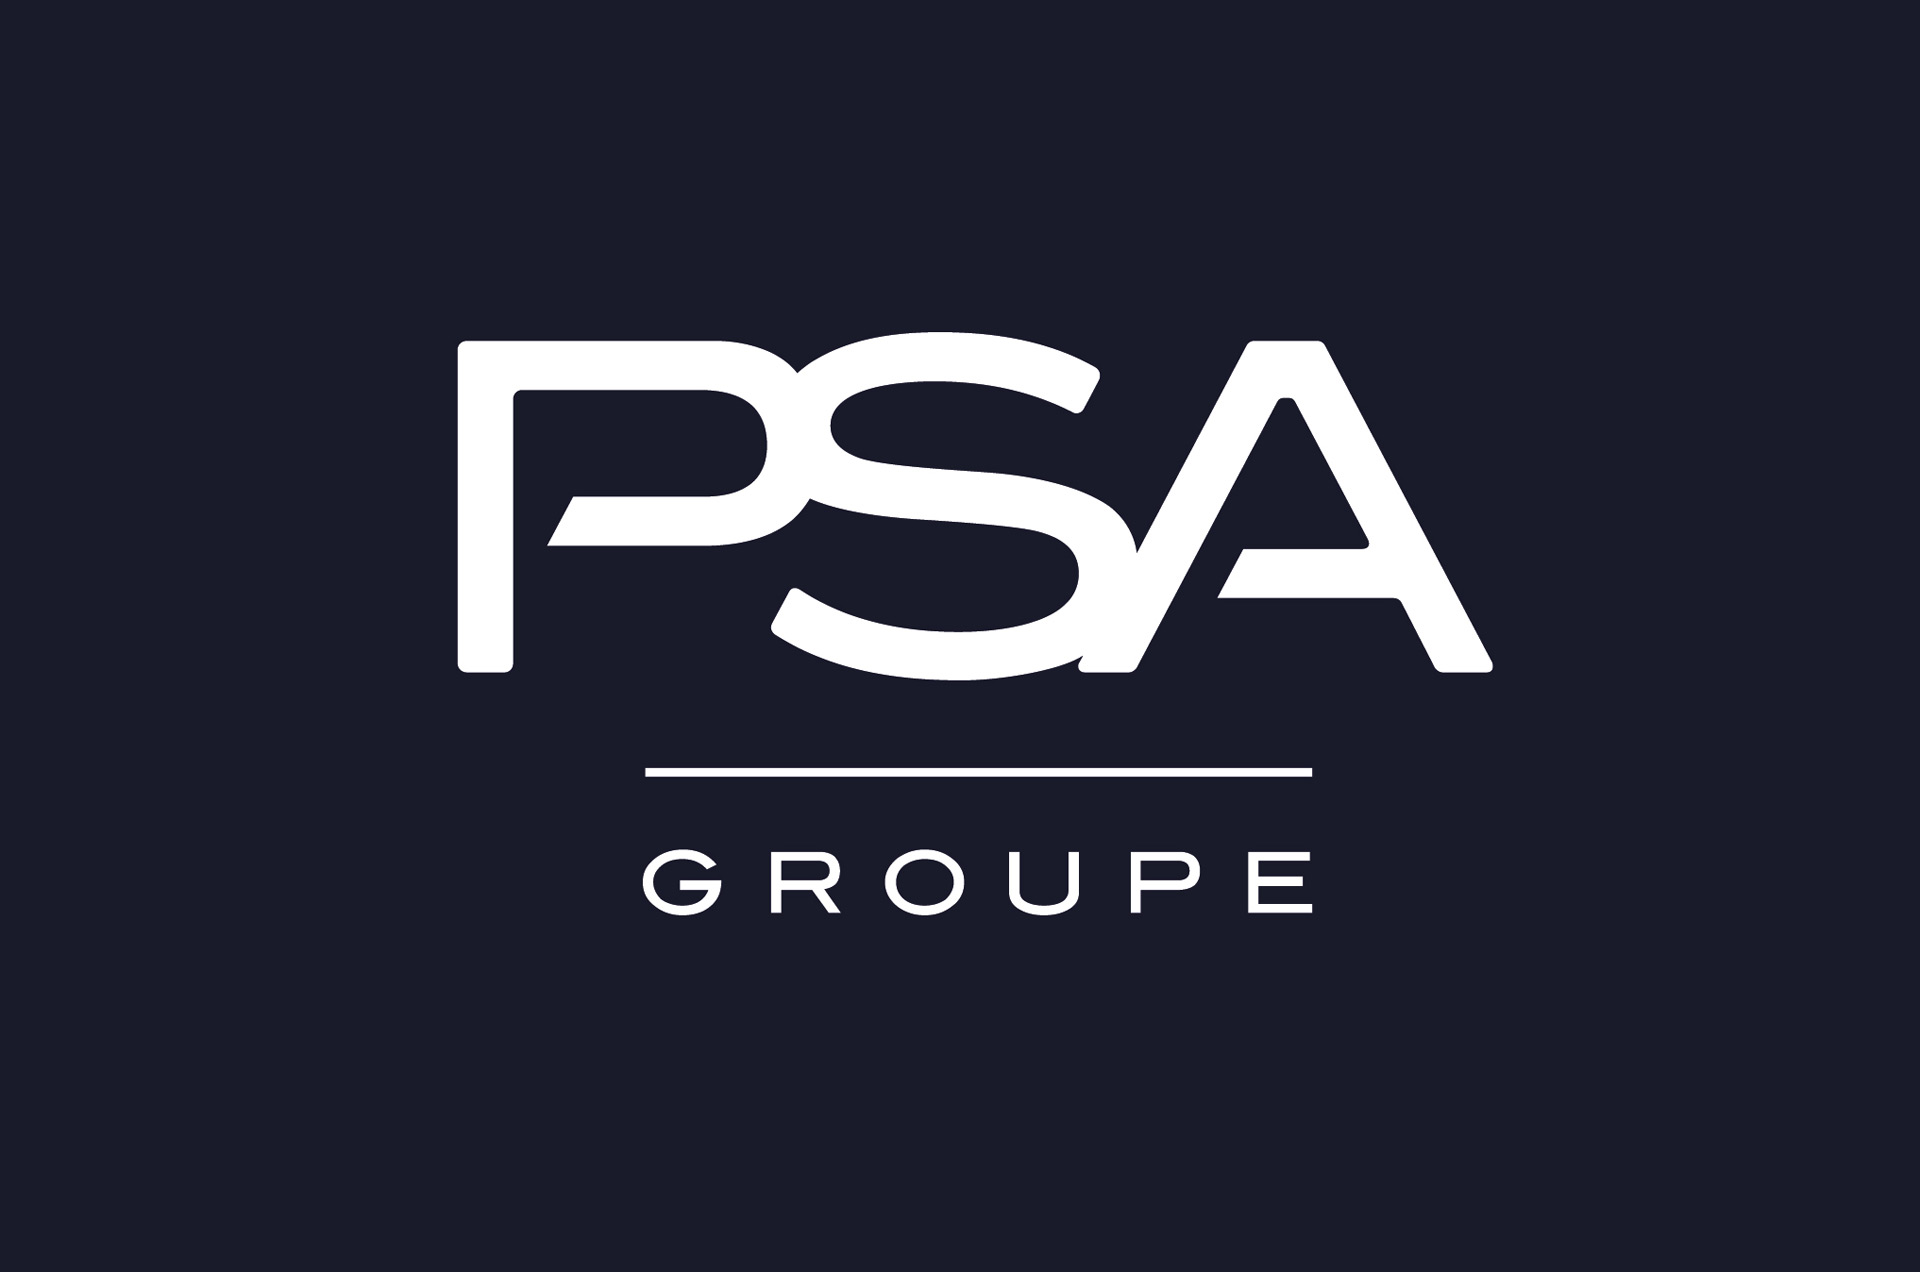 psa-group-will-decide-in-coming-months-what-brand-s-to-launch-in-us